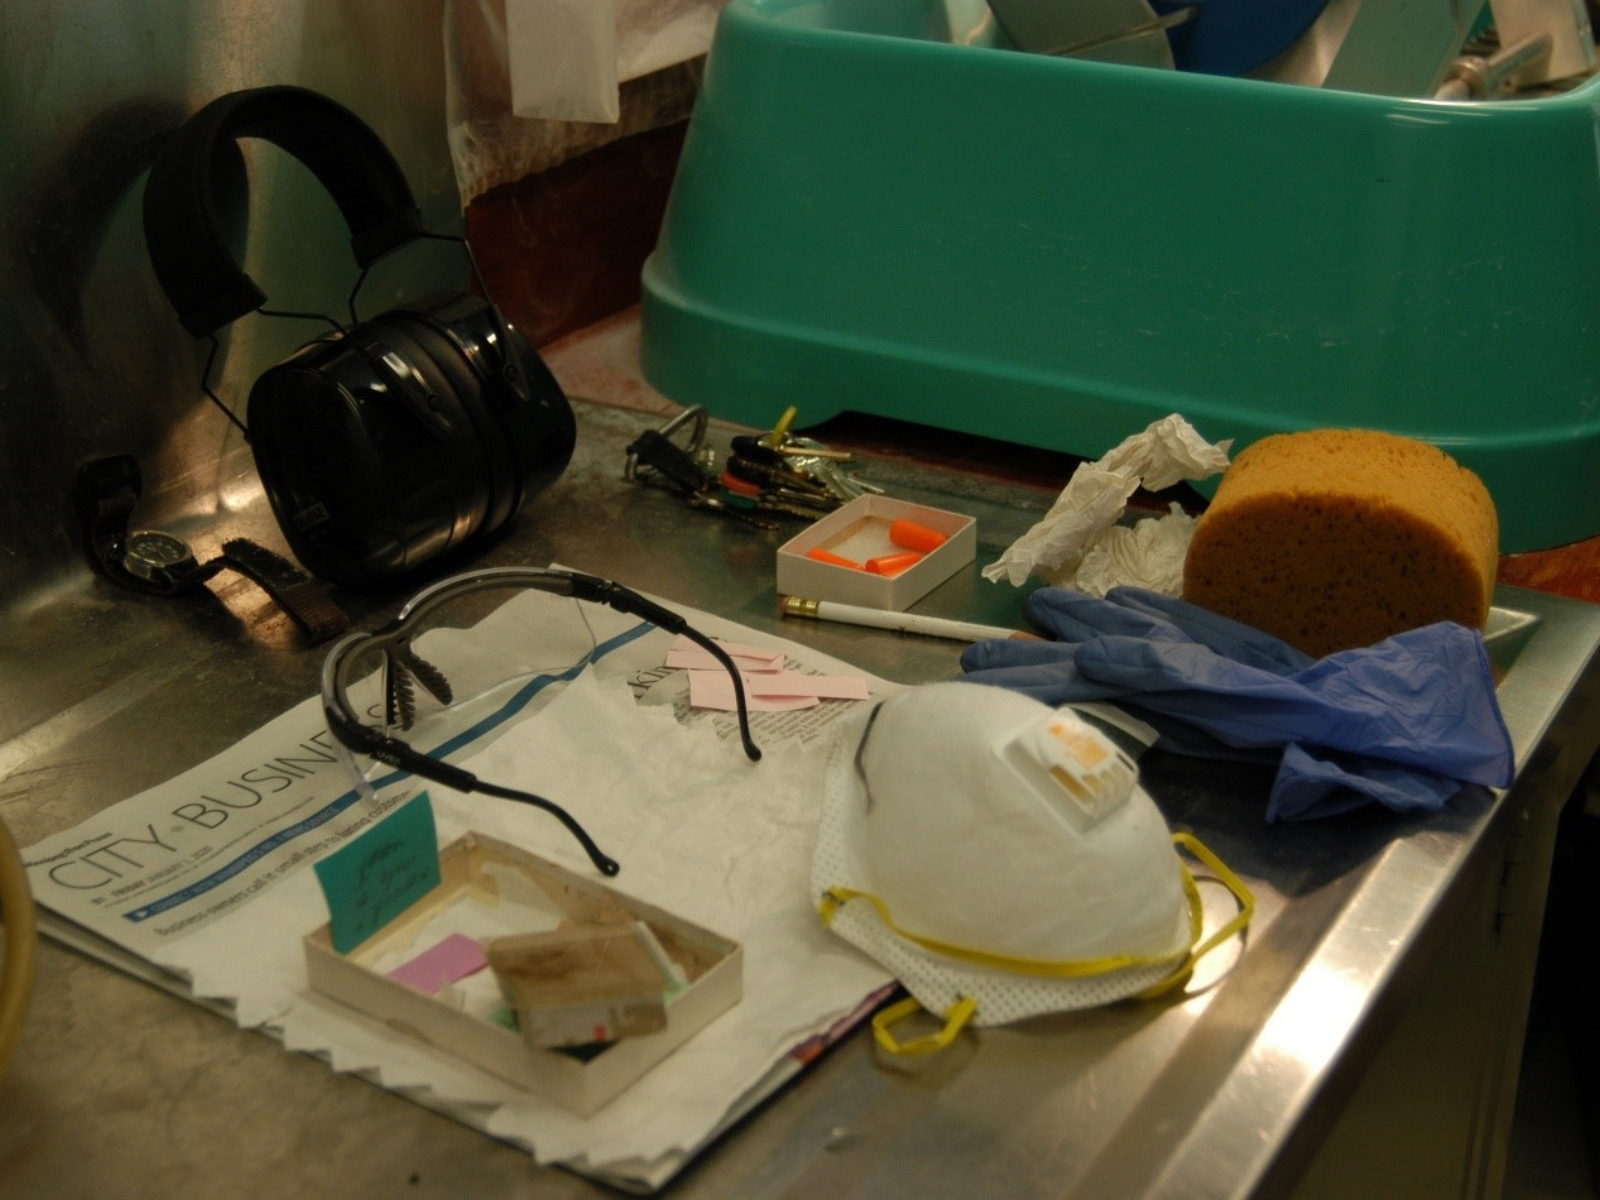 A work station set up with various tools and equipment including earplugs, ear muffs, safety glasses, blue rubber gloves, a sponge, and a high-quality face mask.